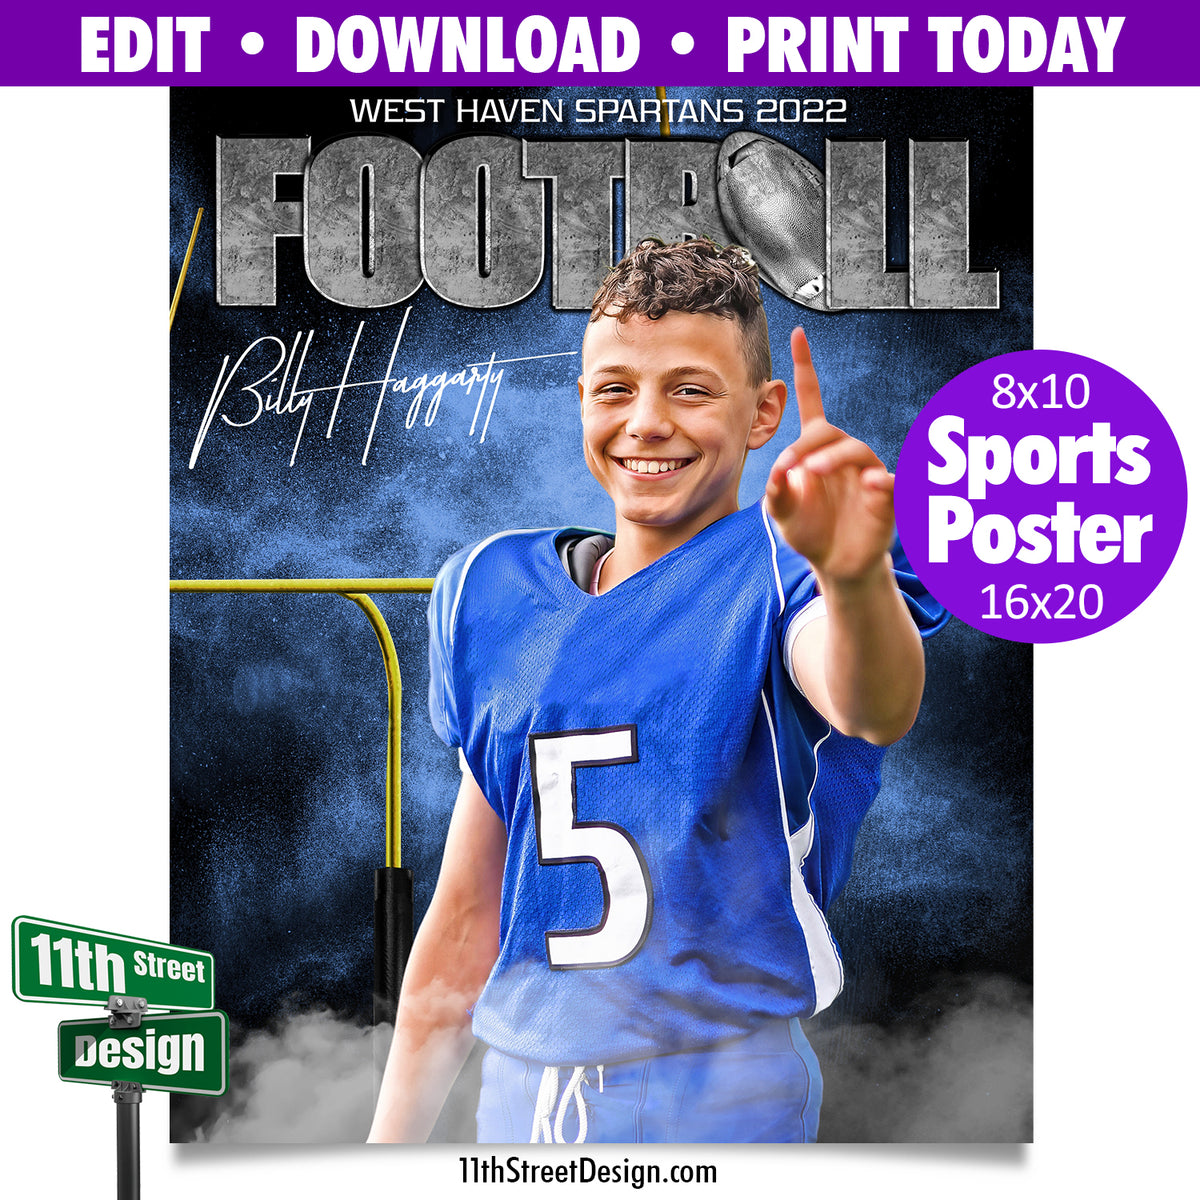 Sports Poster • Edit Now Online • Print Today • Digital Download • Custom Sports Photos • Senior Day Night Poster • Rocked Football Template